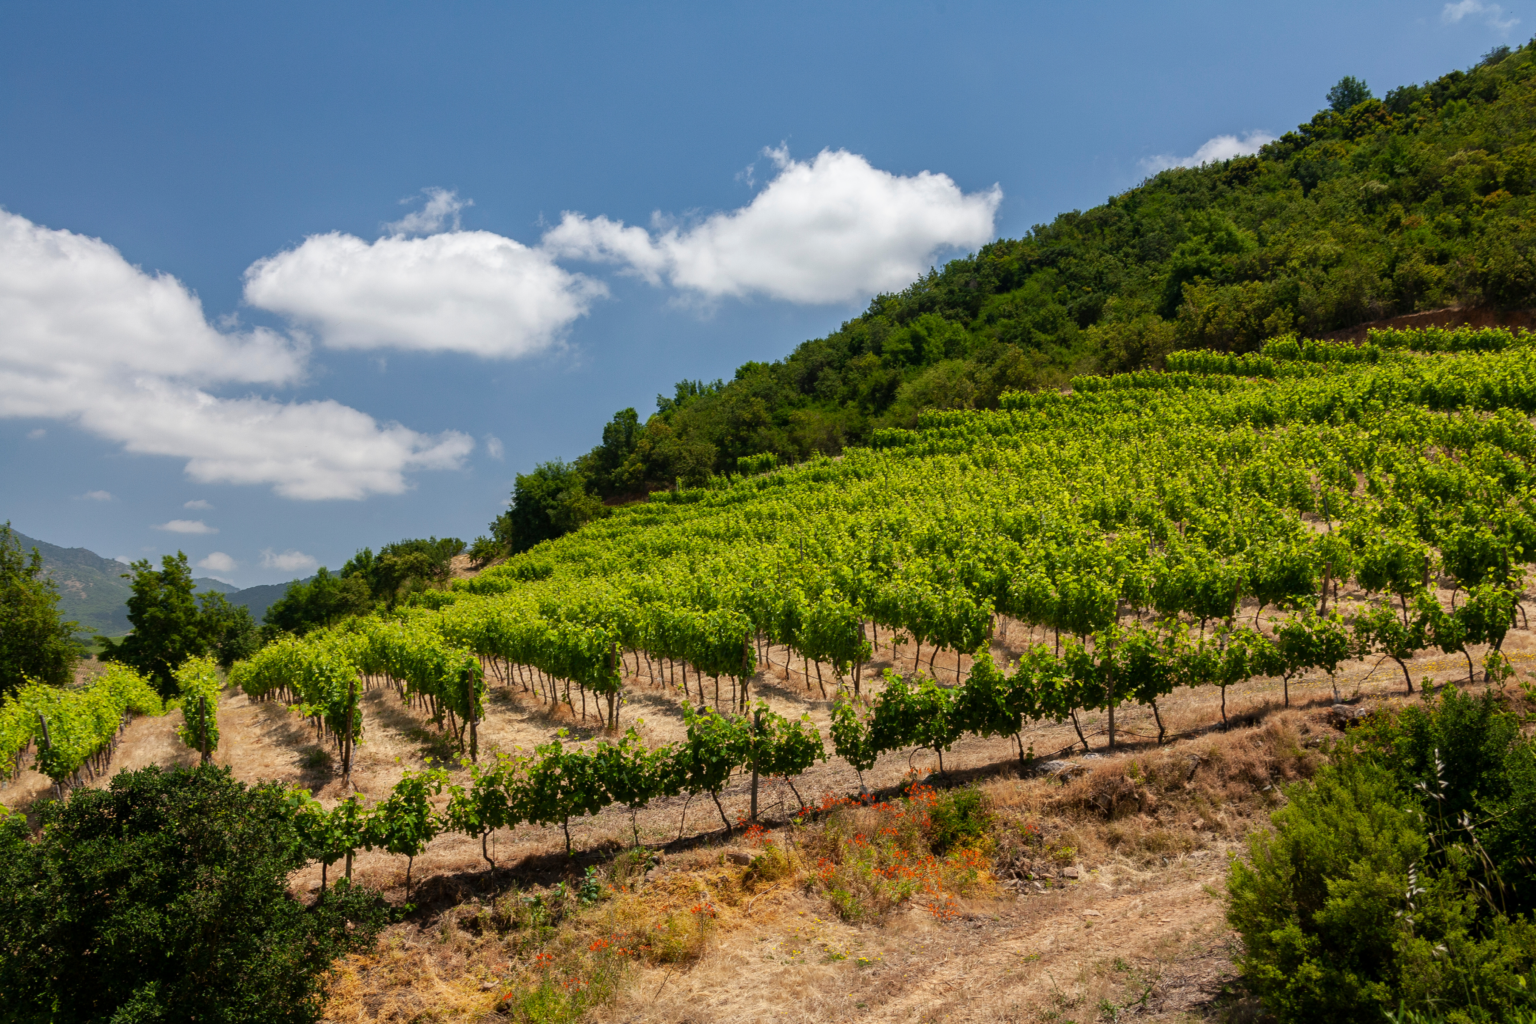 View of grapevines on a mountainside